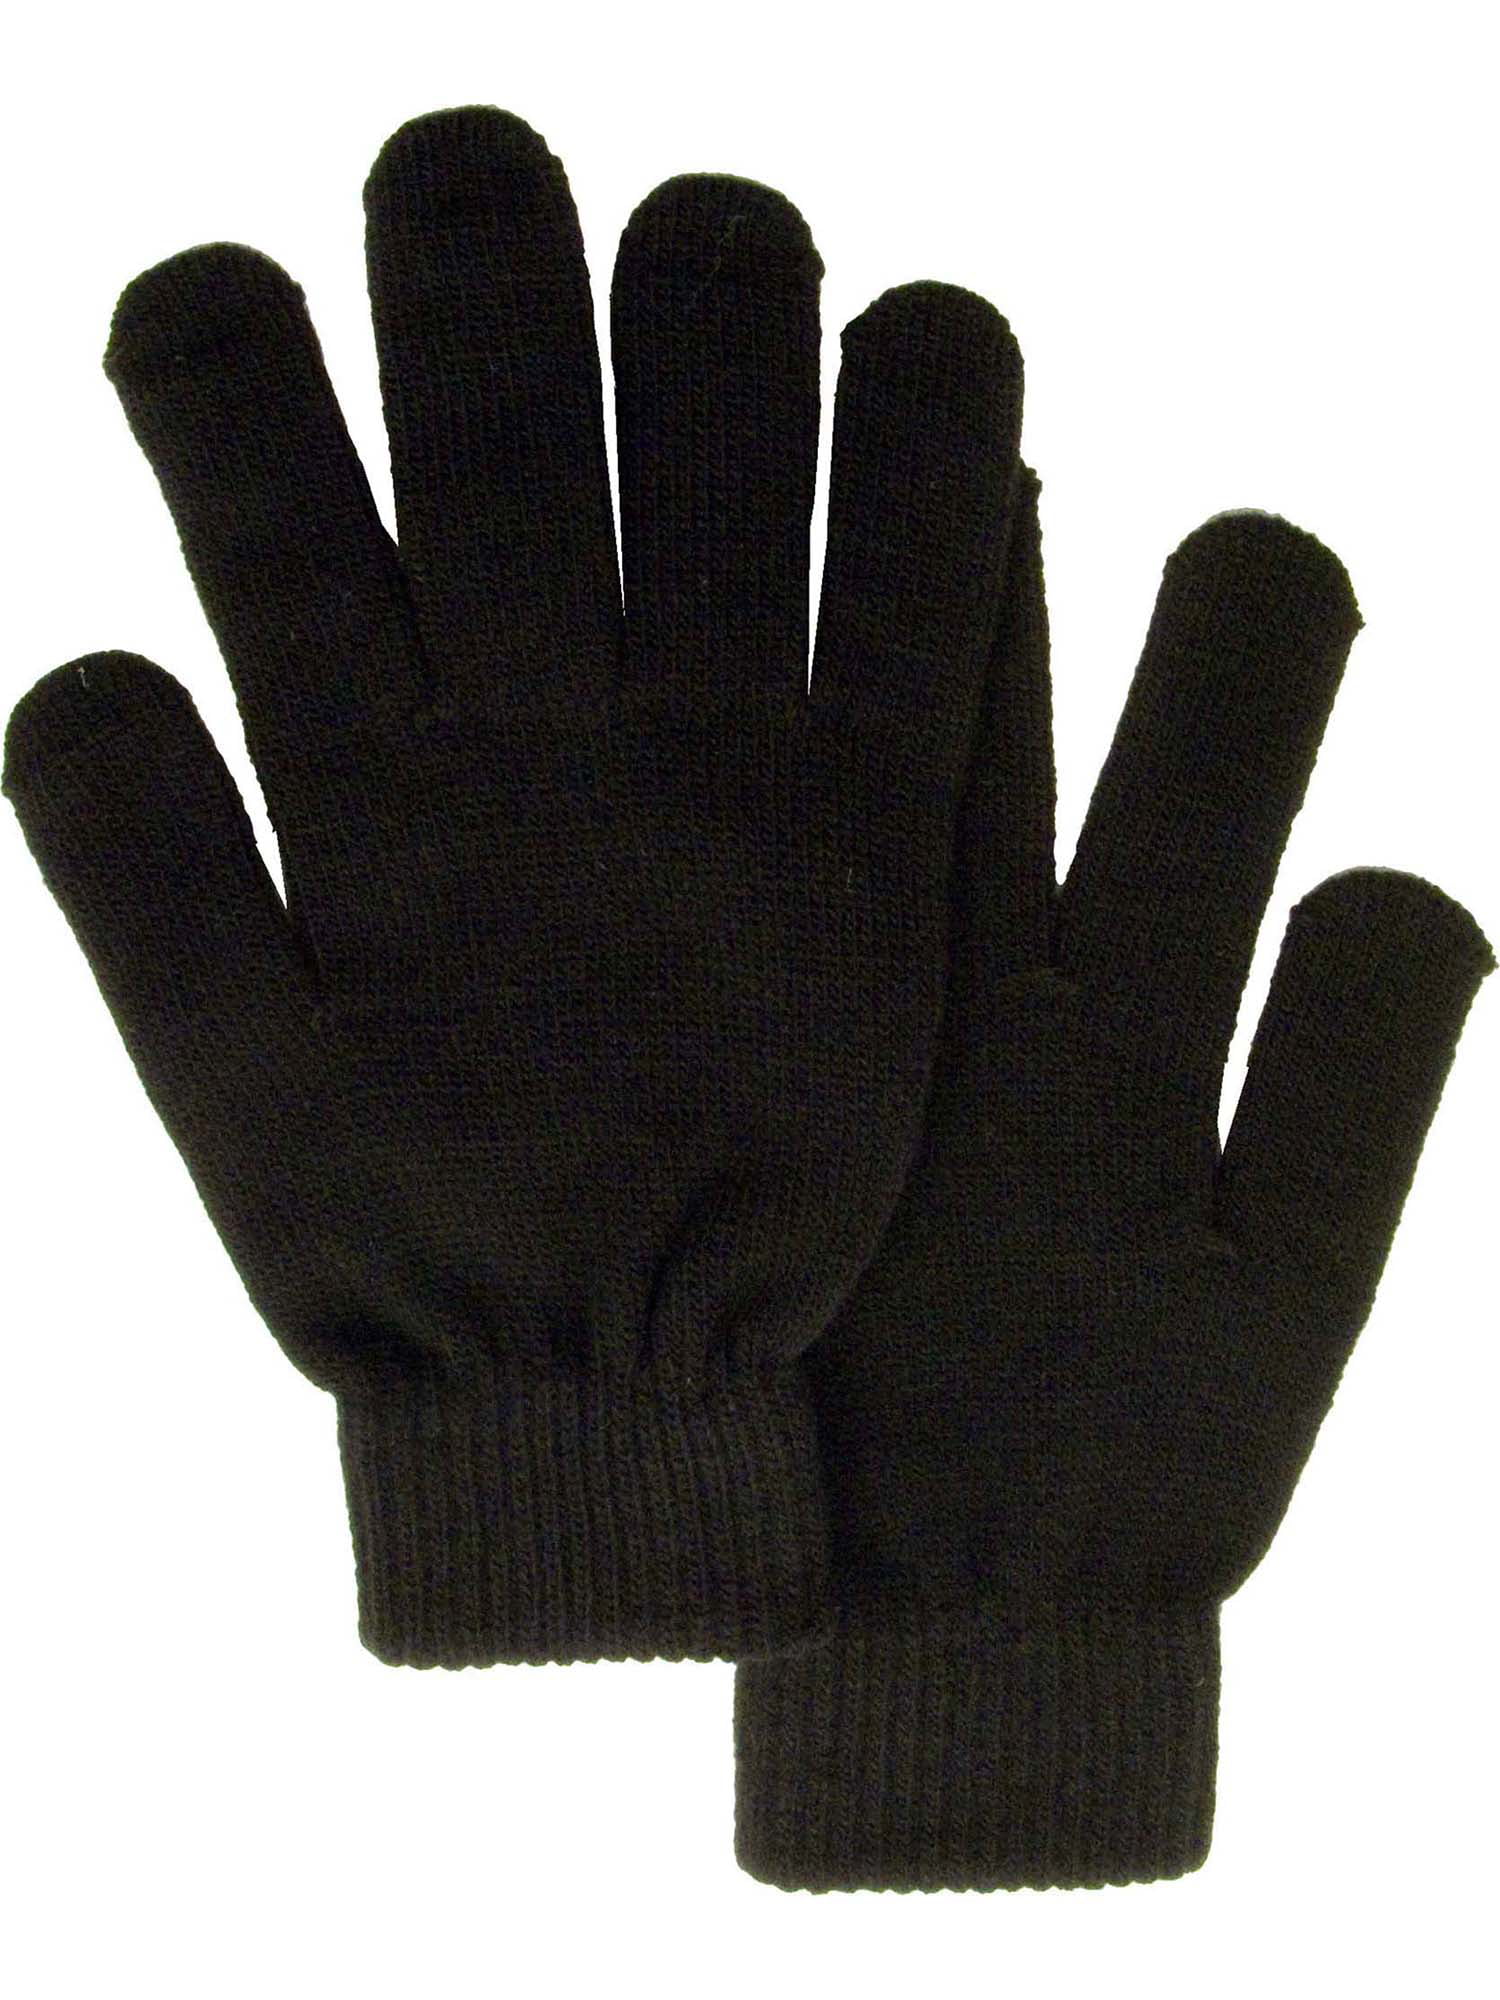 "Stretchy" Magic Gloves Winter Mens Black Ladies Womens One Size Warm Soft 